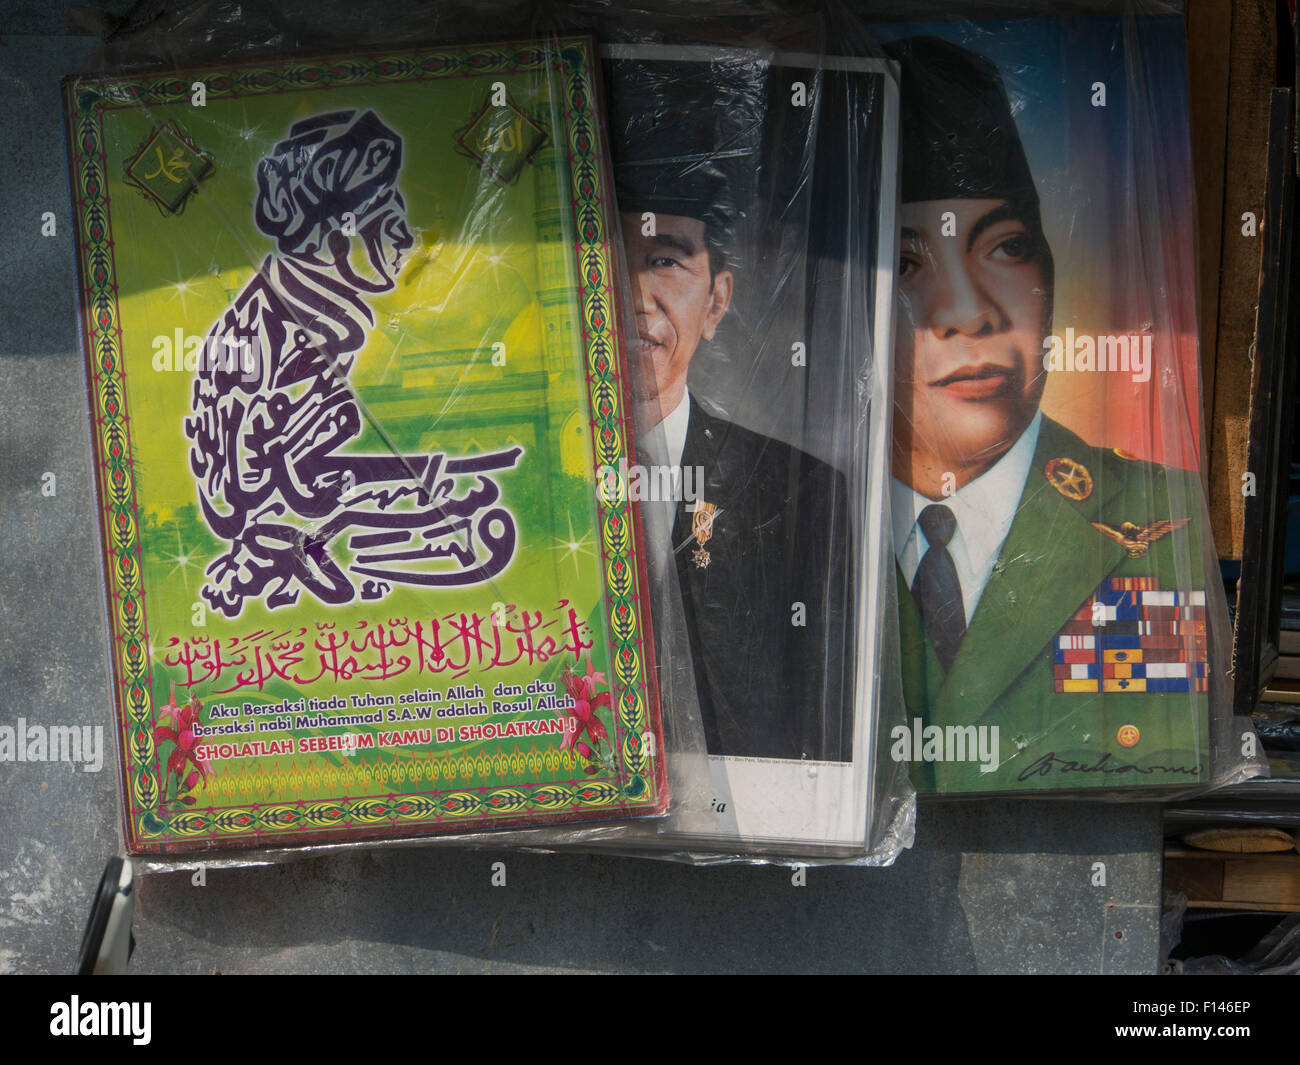 Posters of President Widodo, late president Soekarno and Muslim writings on a wall in Jakarta, Indonesia Stock Photo